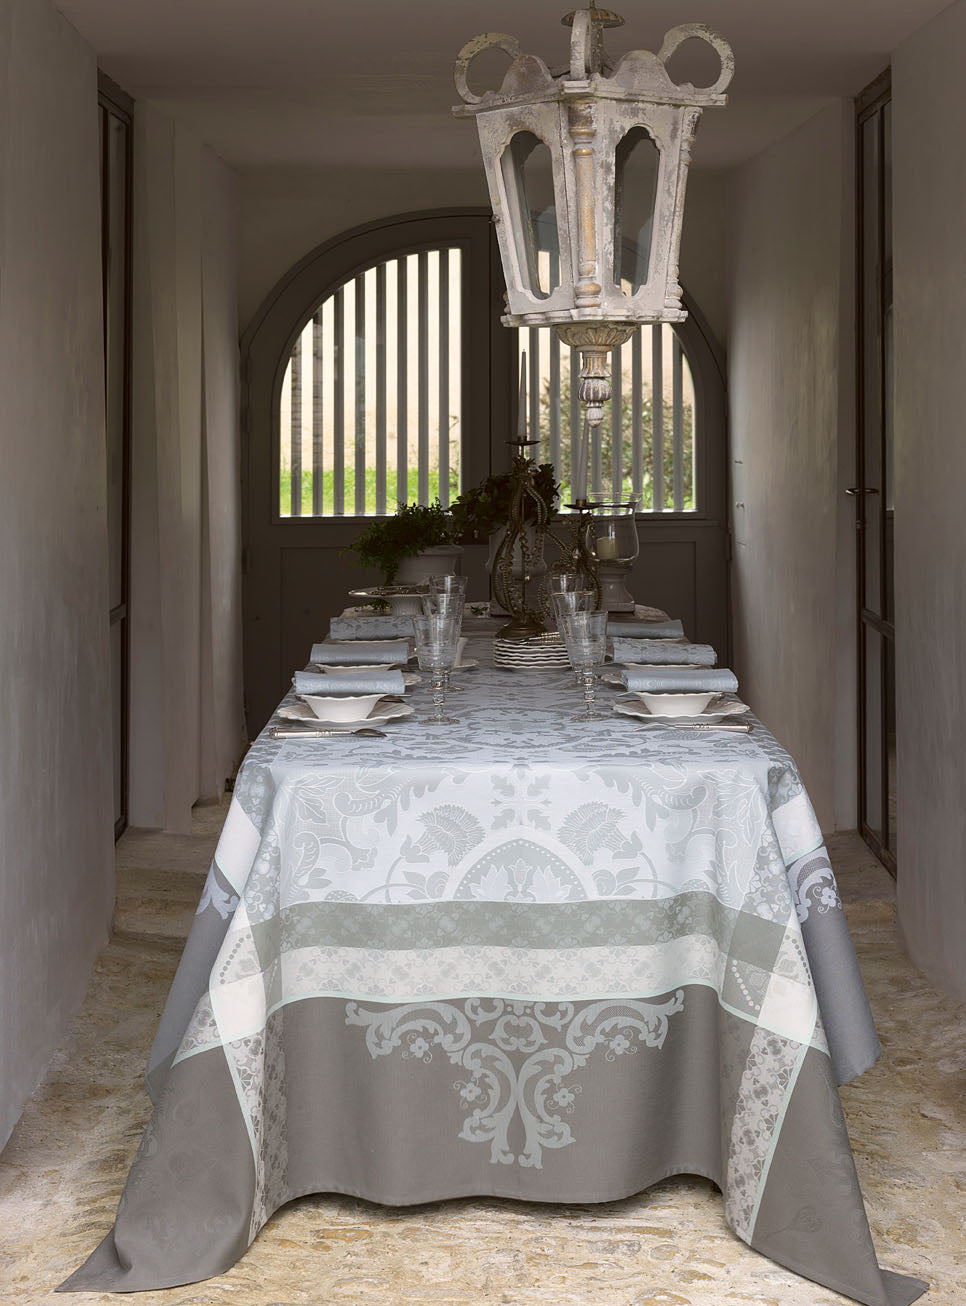 LJF Coated/Stain Resistant Table Linens